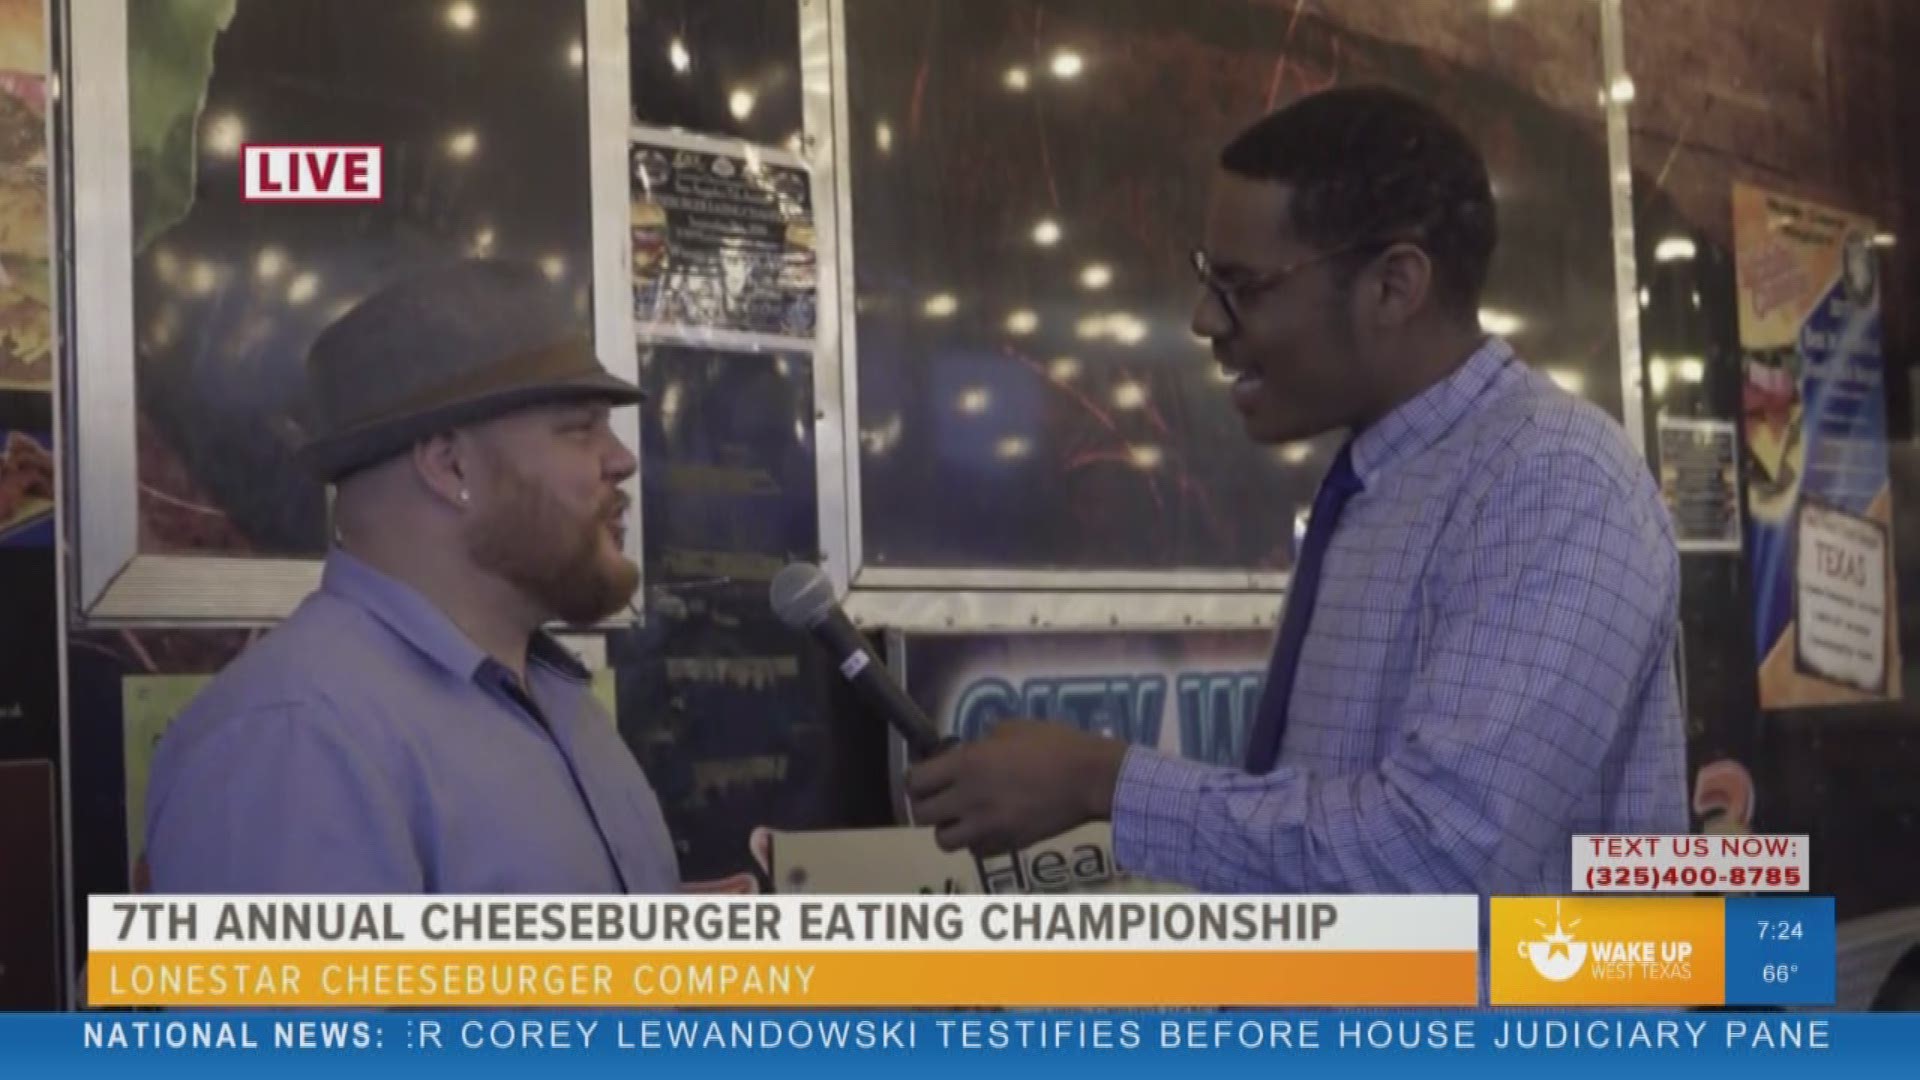 In honor of National Cheeseburger Day, our Malik Mingo spoke with the owner of Lonestar Cheeseburger Company about the 7th annual cheeseburger eating championship on September 18 at 6:30 p.m.